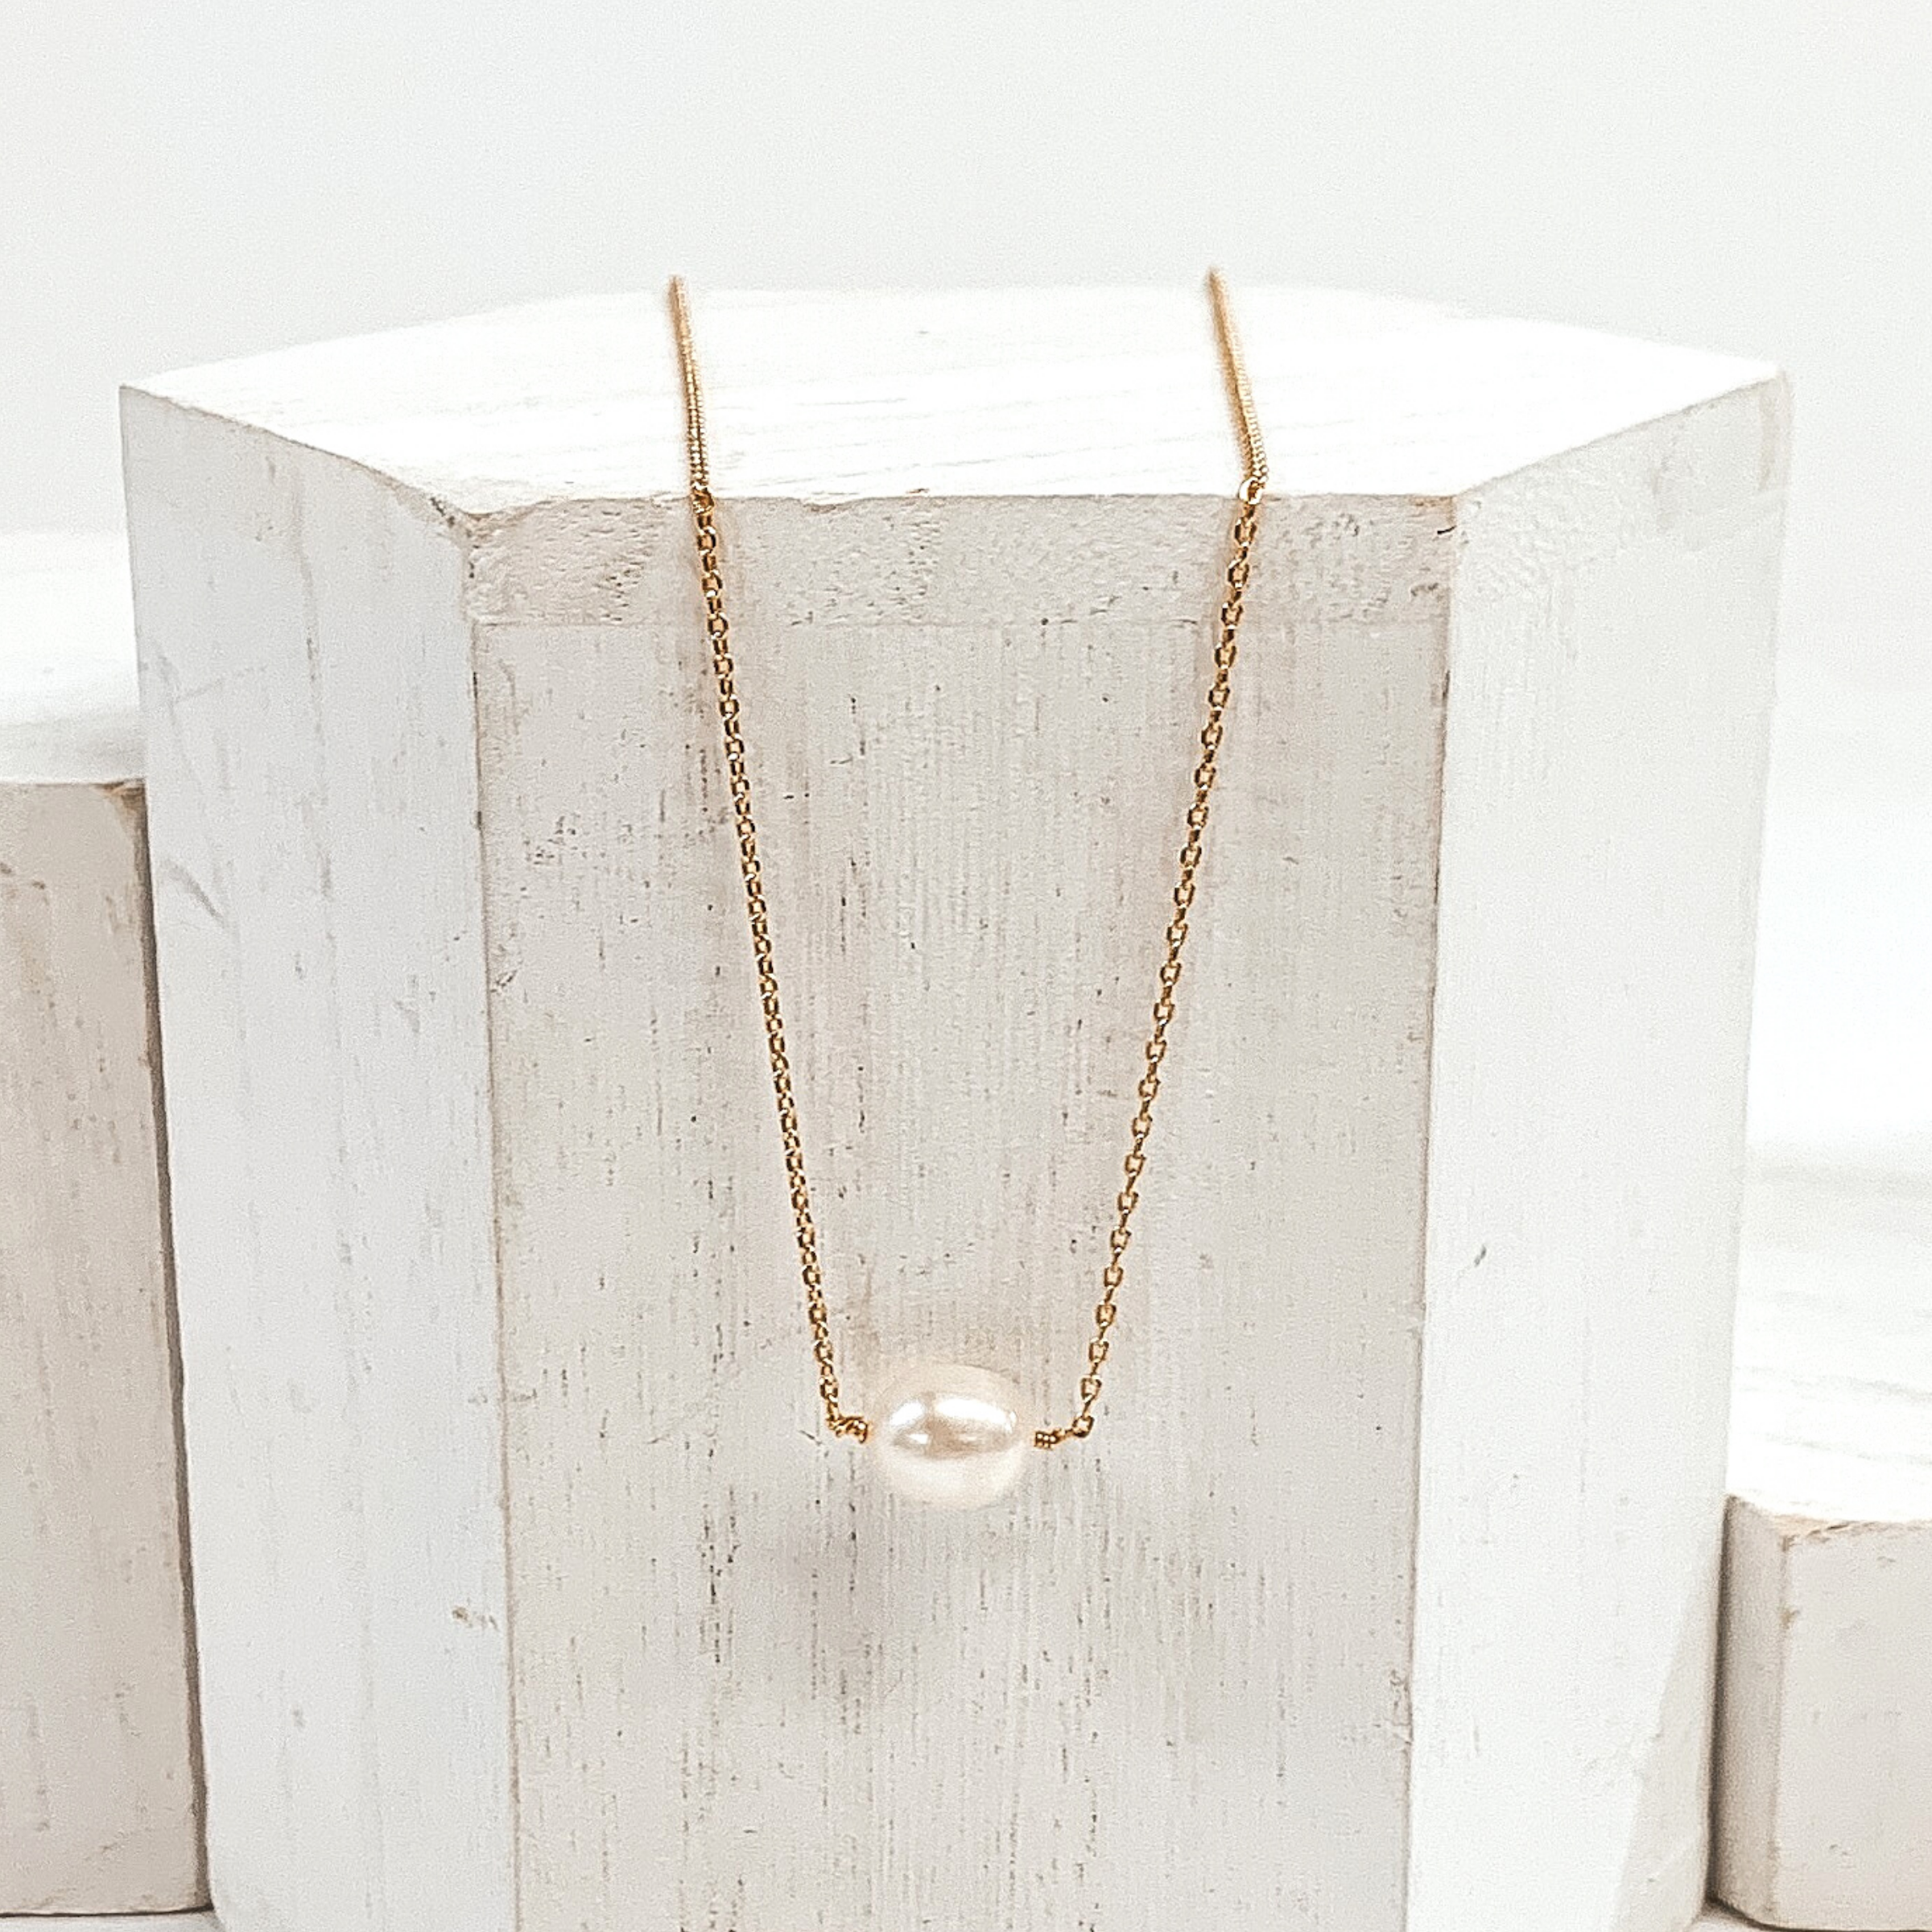 Simple, gold chain necklace with a single white pearl bead. Pictured laying on a white block on a white background.